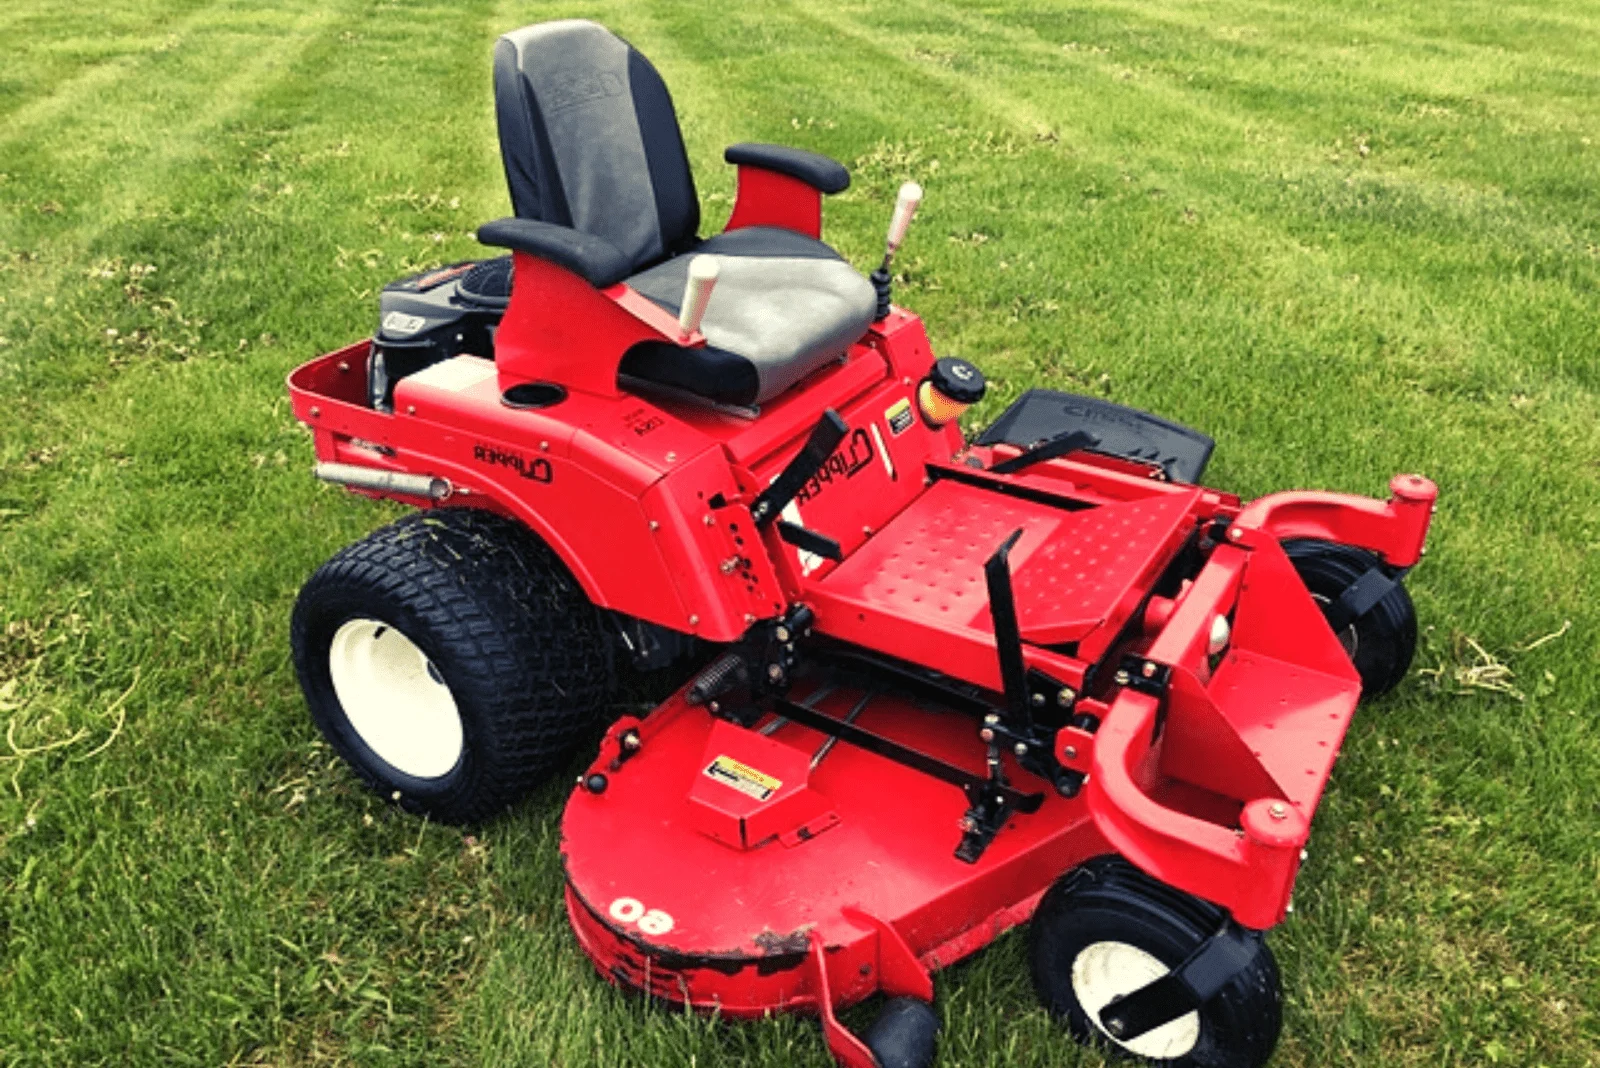 Country Clipper Mower on grass